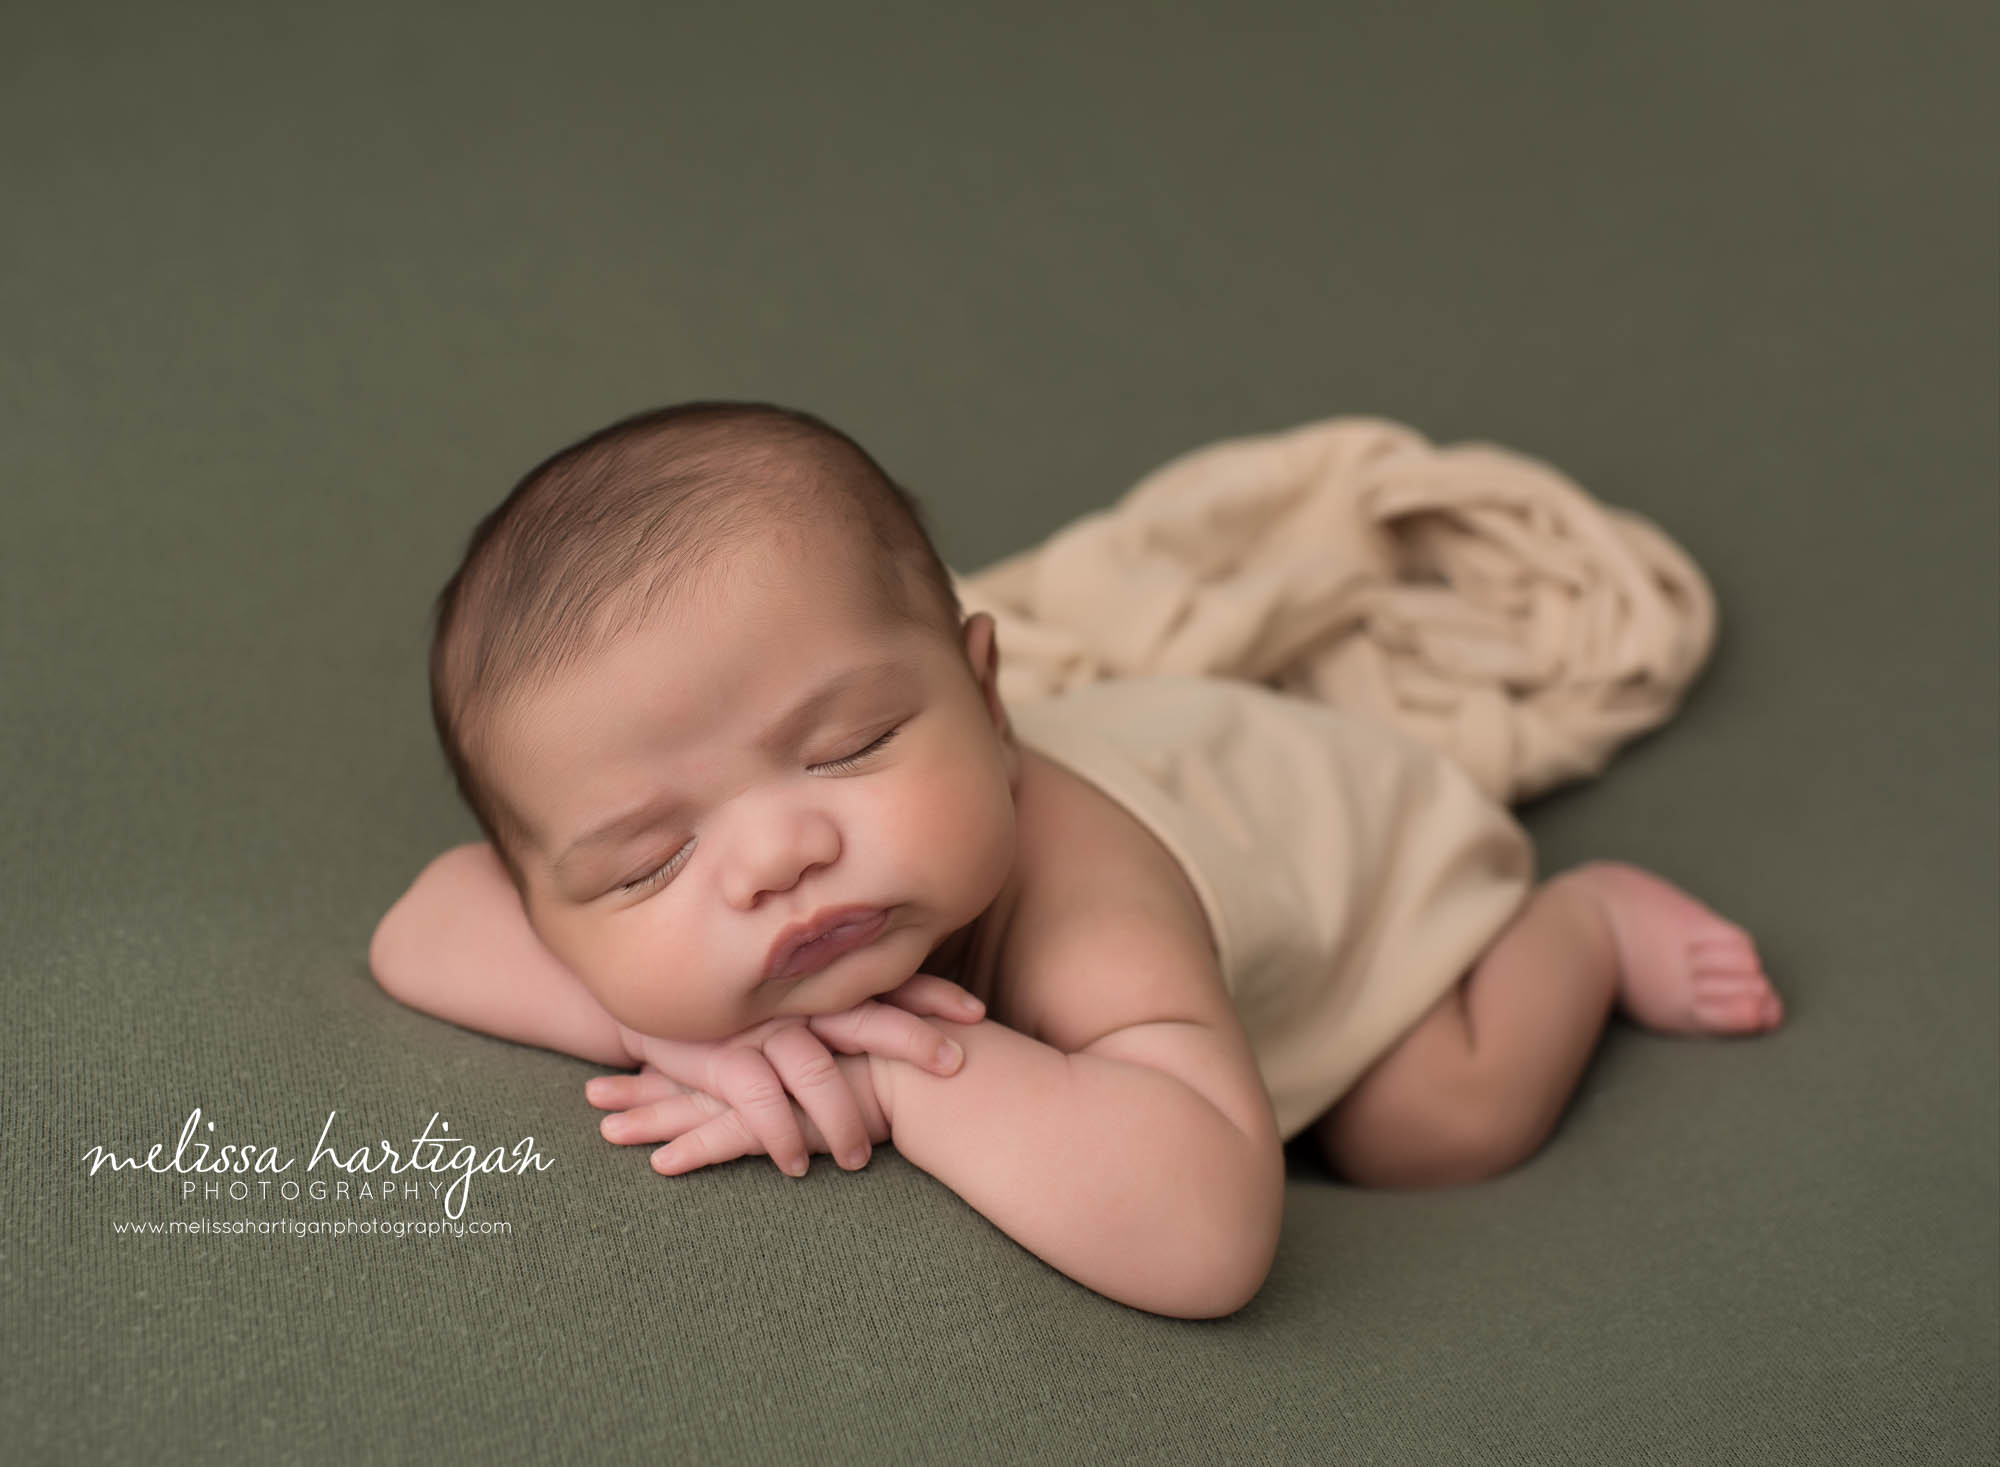 newborn baby boy posed on tummy with hands under chin with cream wrap draped over